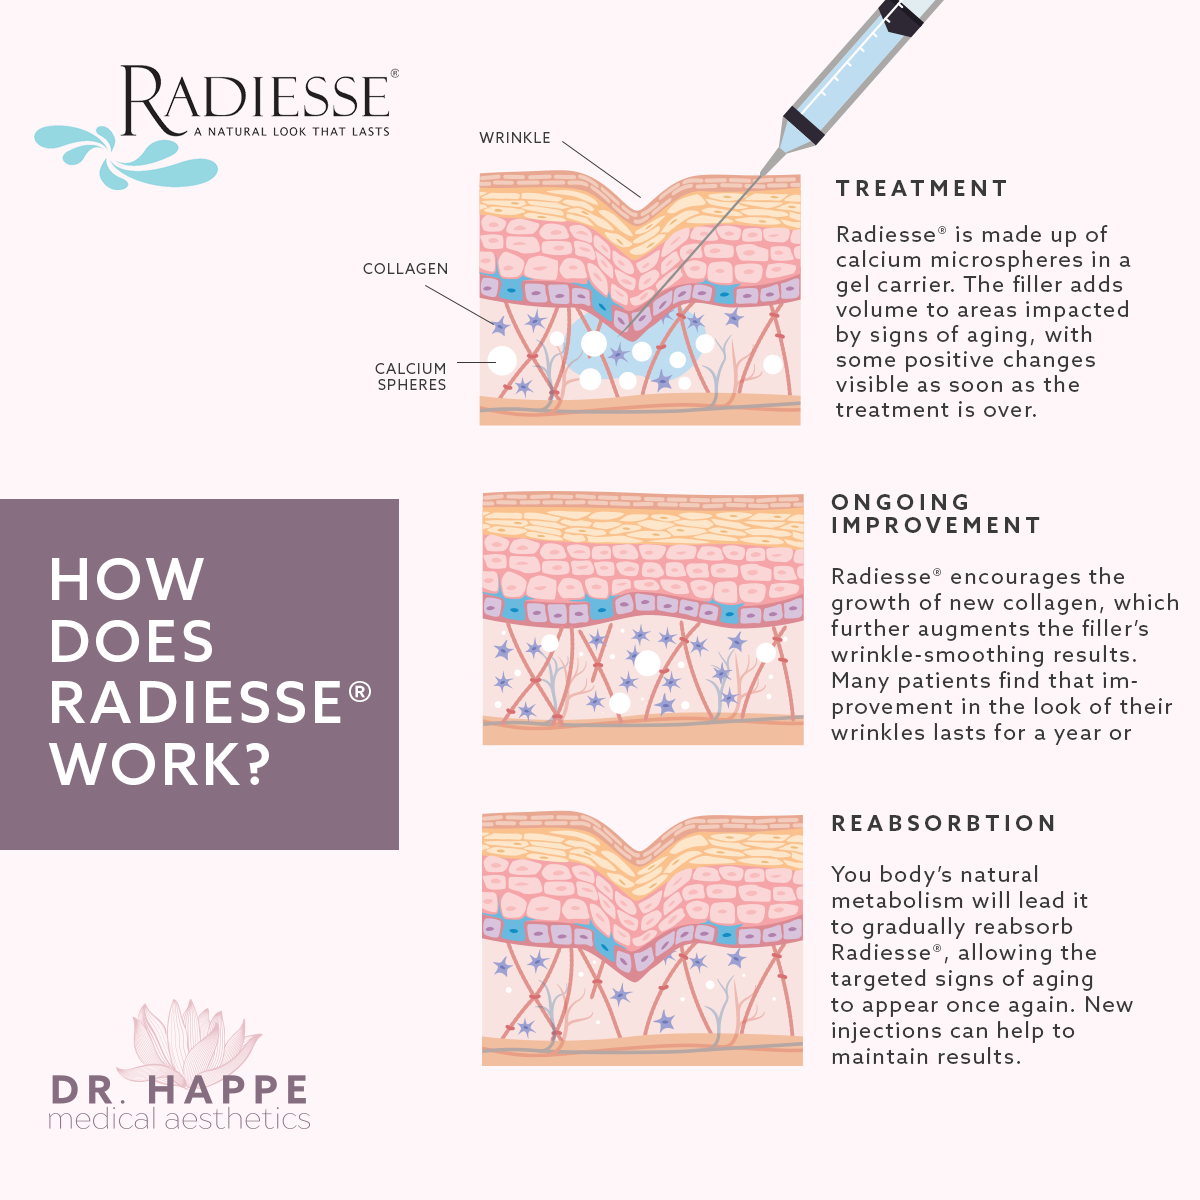 Learn how Radiesse® works at the Boston area’s Dr. Happe Medical Aesthetics.